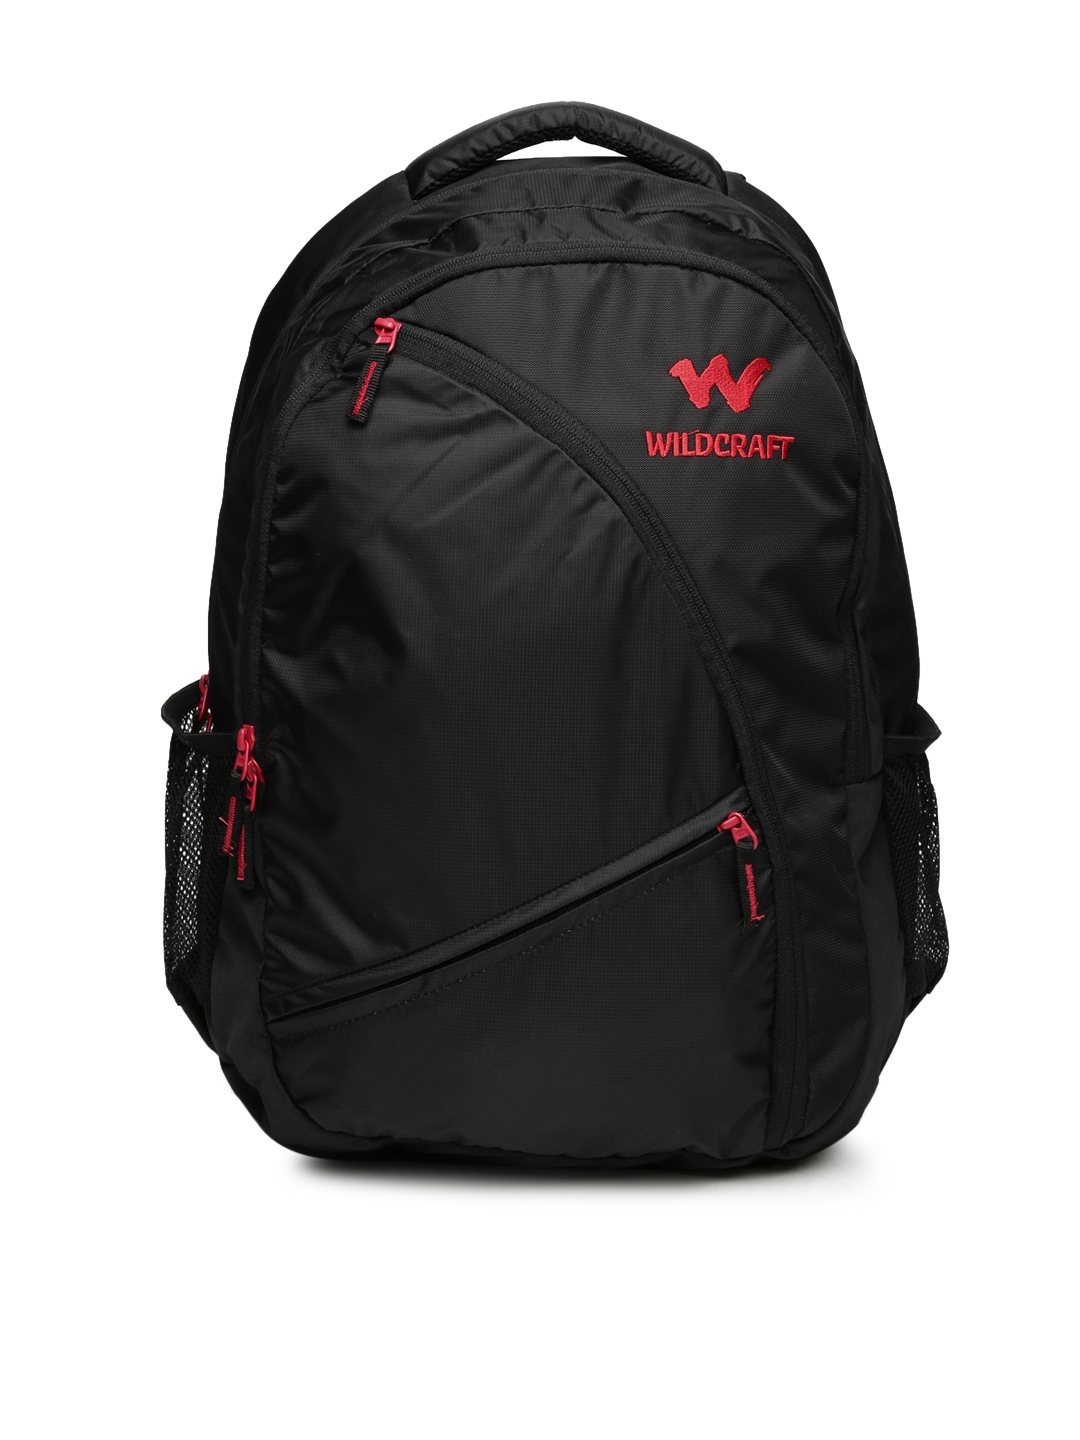 Details more than 93 wildcraft bags myntra - in.duhocakina